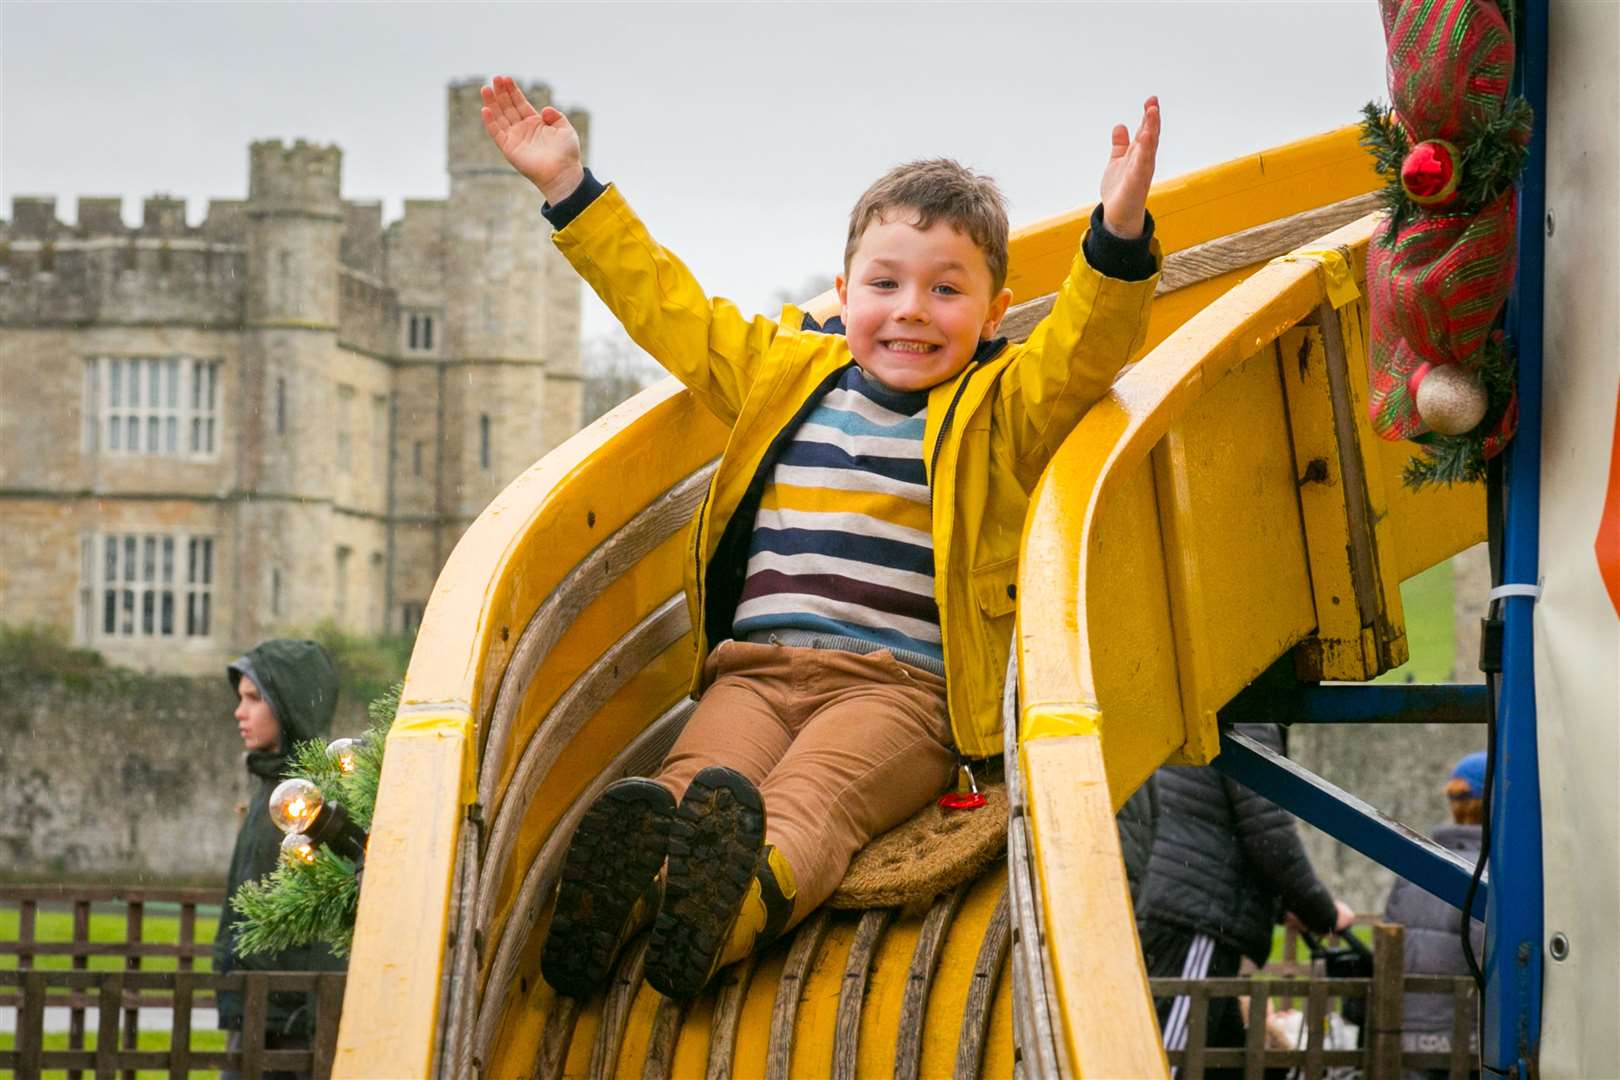 It's the final weekend of the market at Leeds Castle